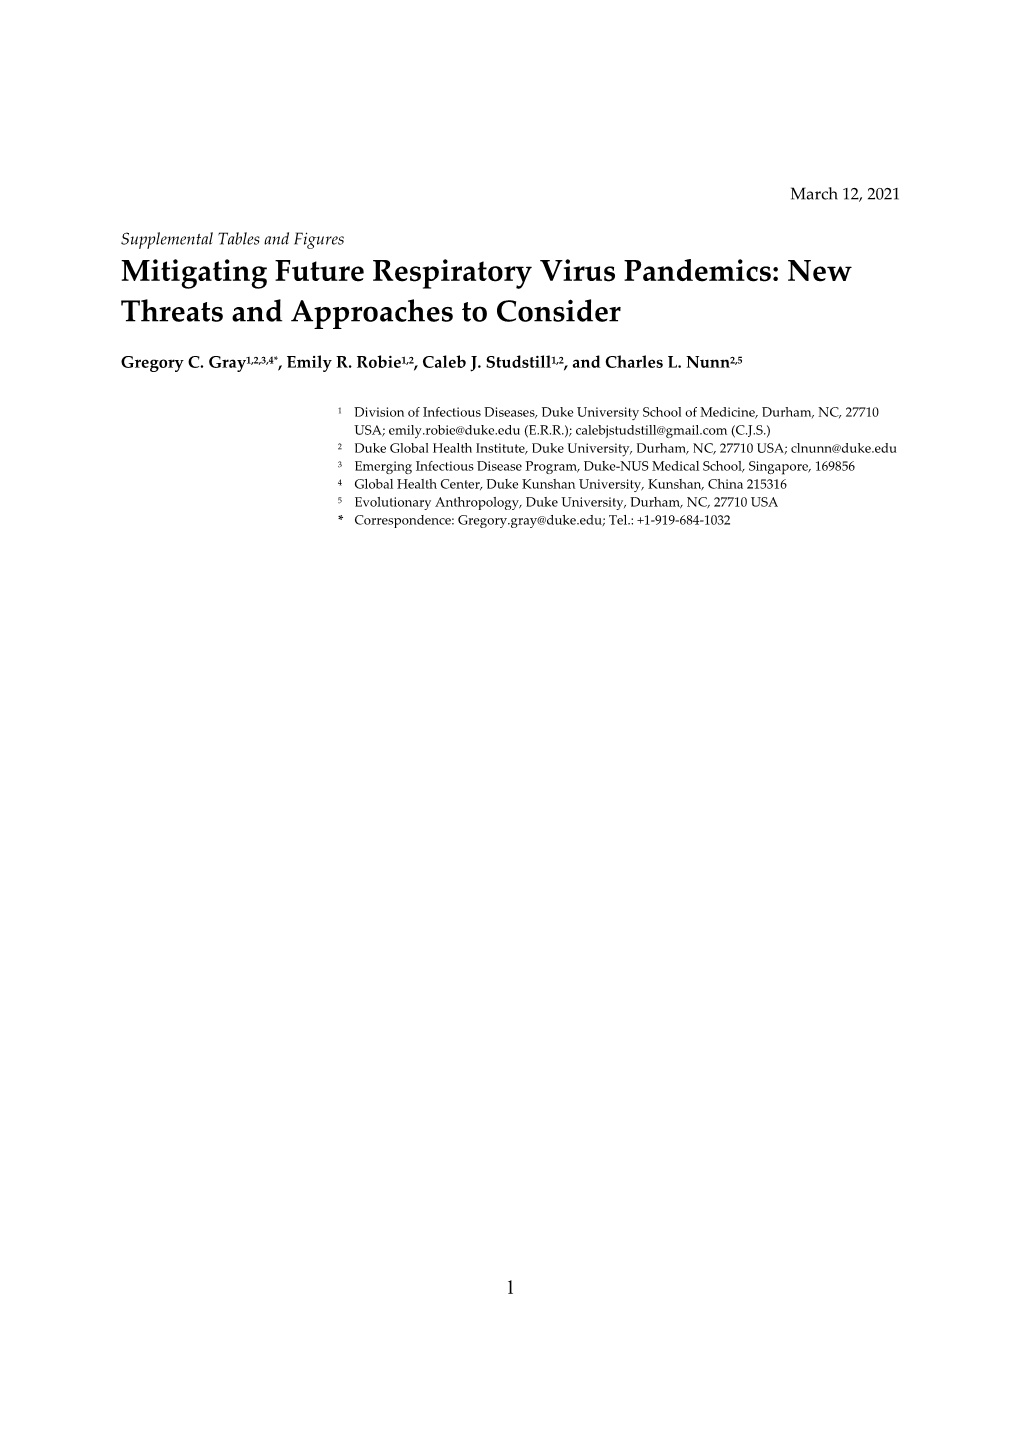 Mitigating Future Respiratory Virus Pandemics: New Threats and Approaches to Consider